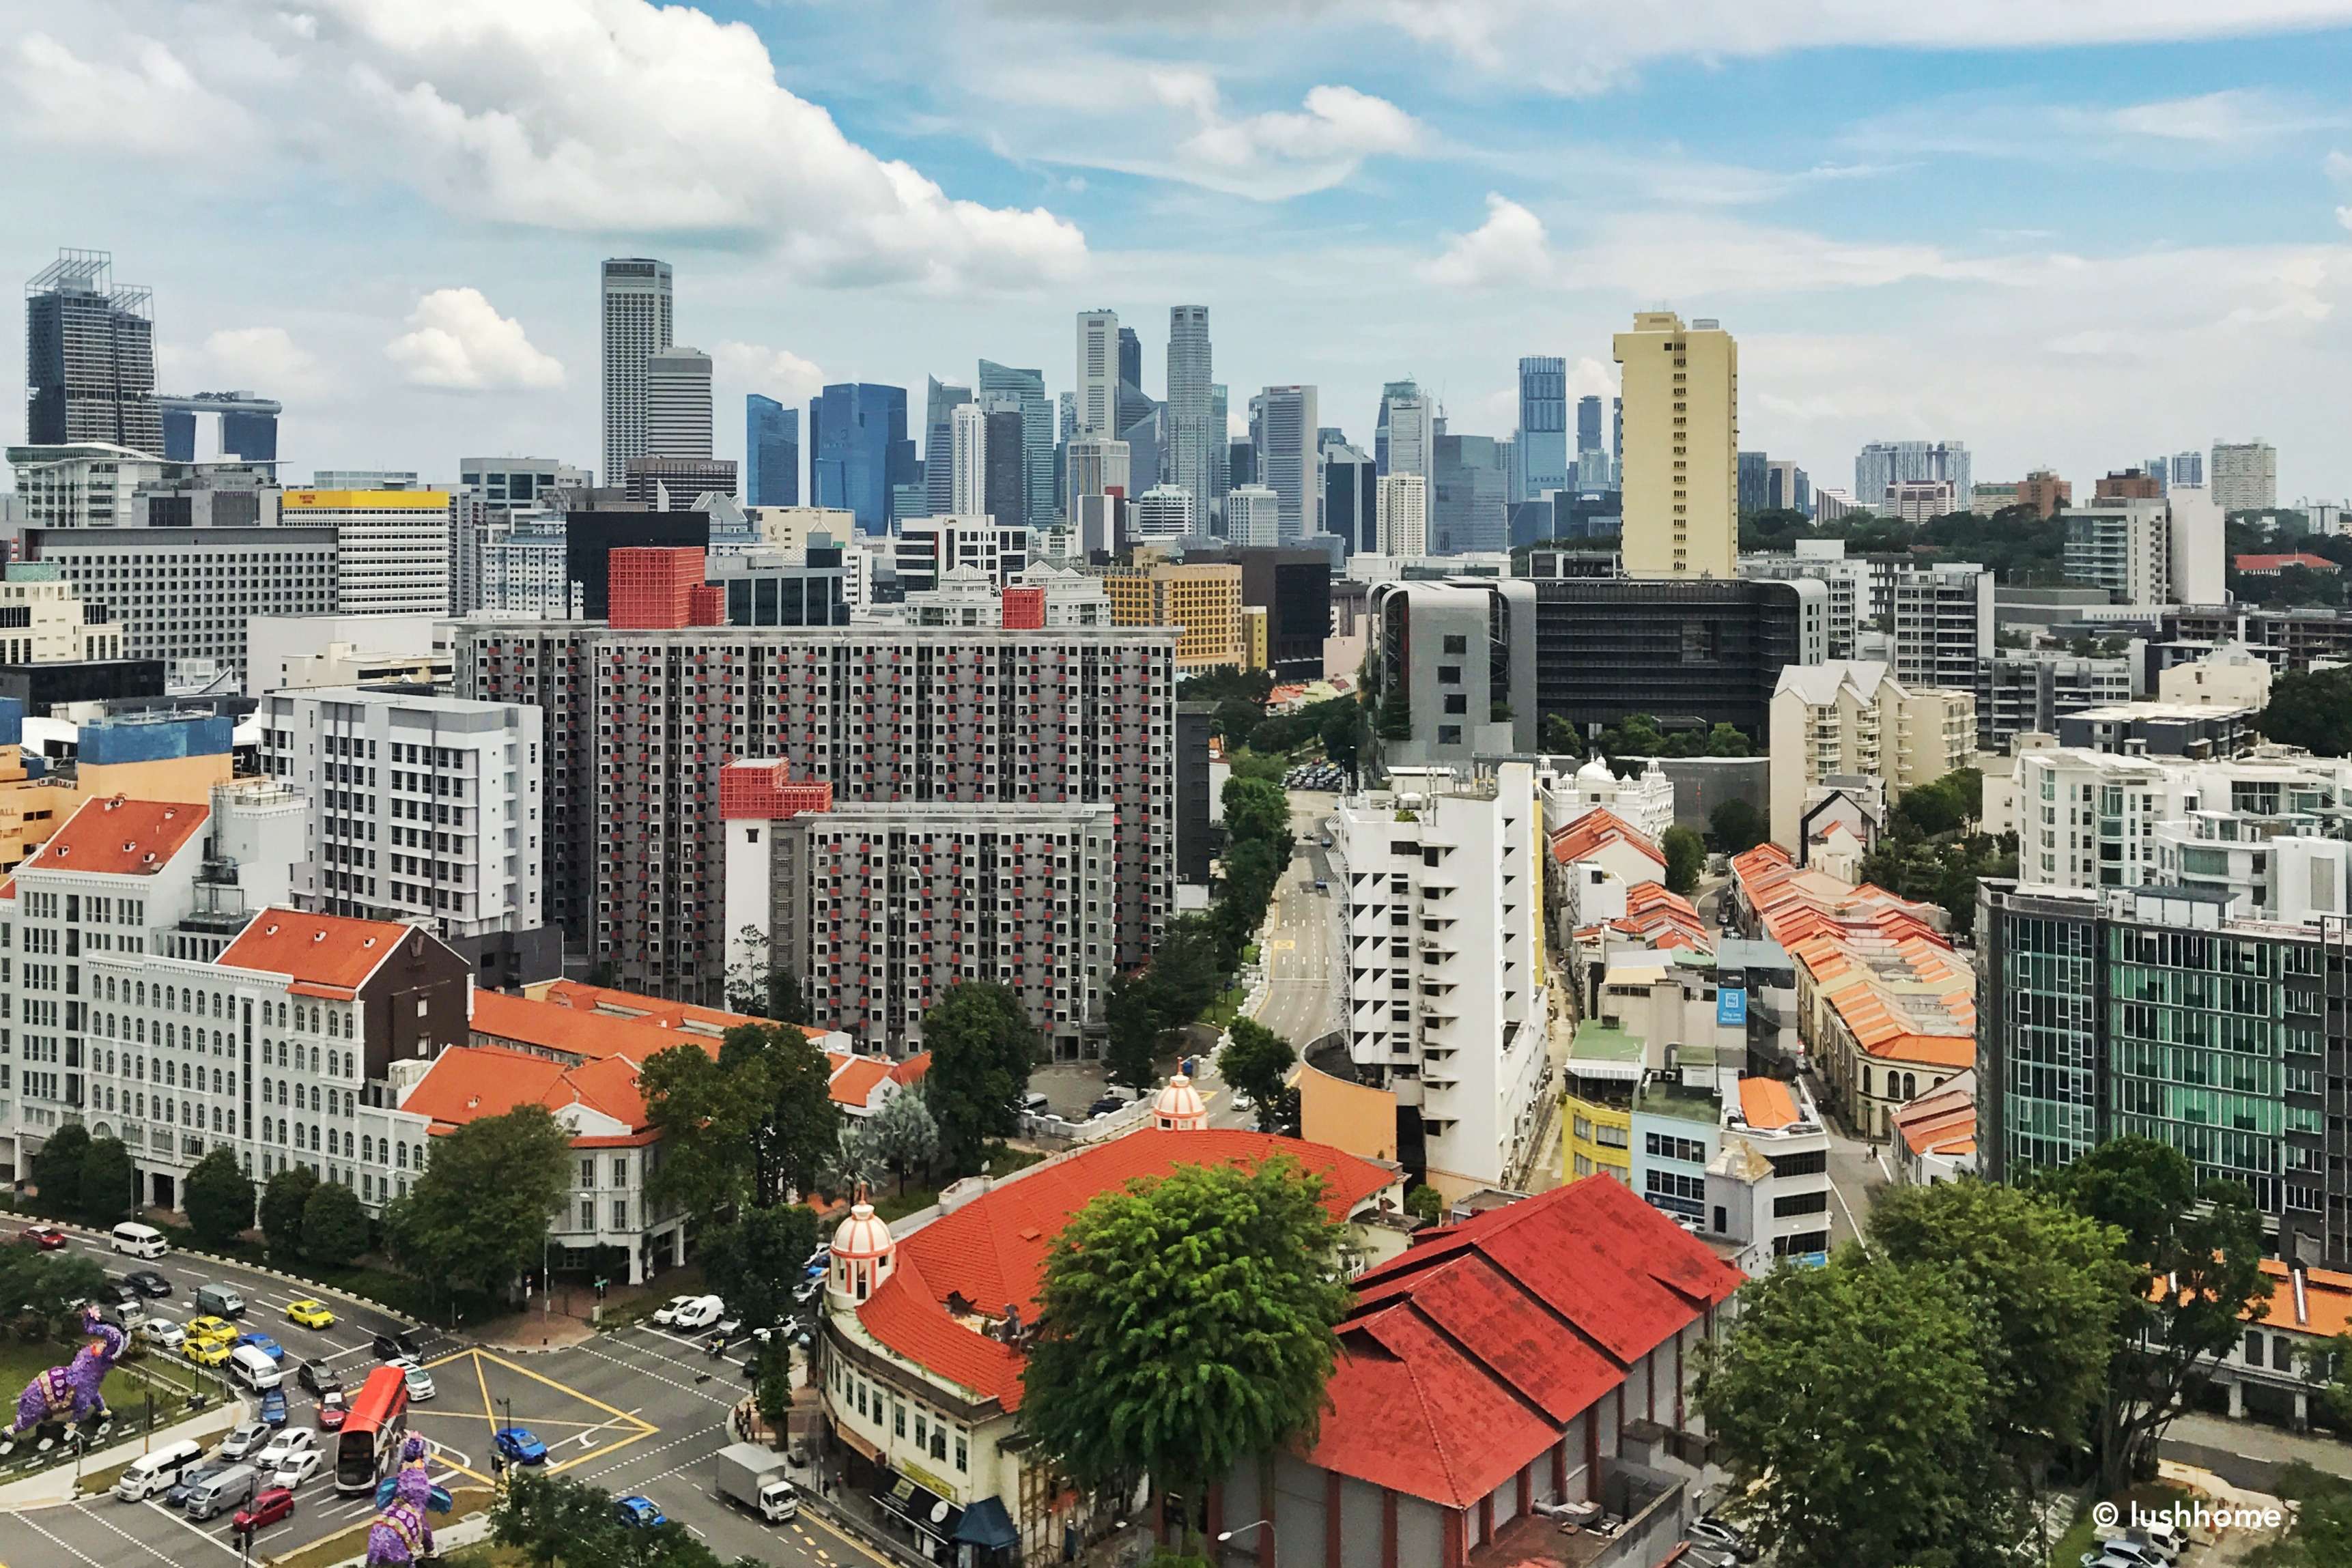 Singapore private home prices to grow 2% in 2020, 2021: Fitch Ratings